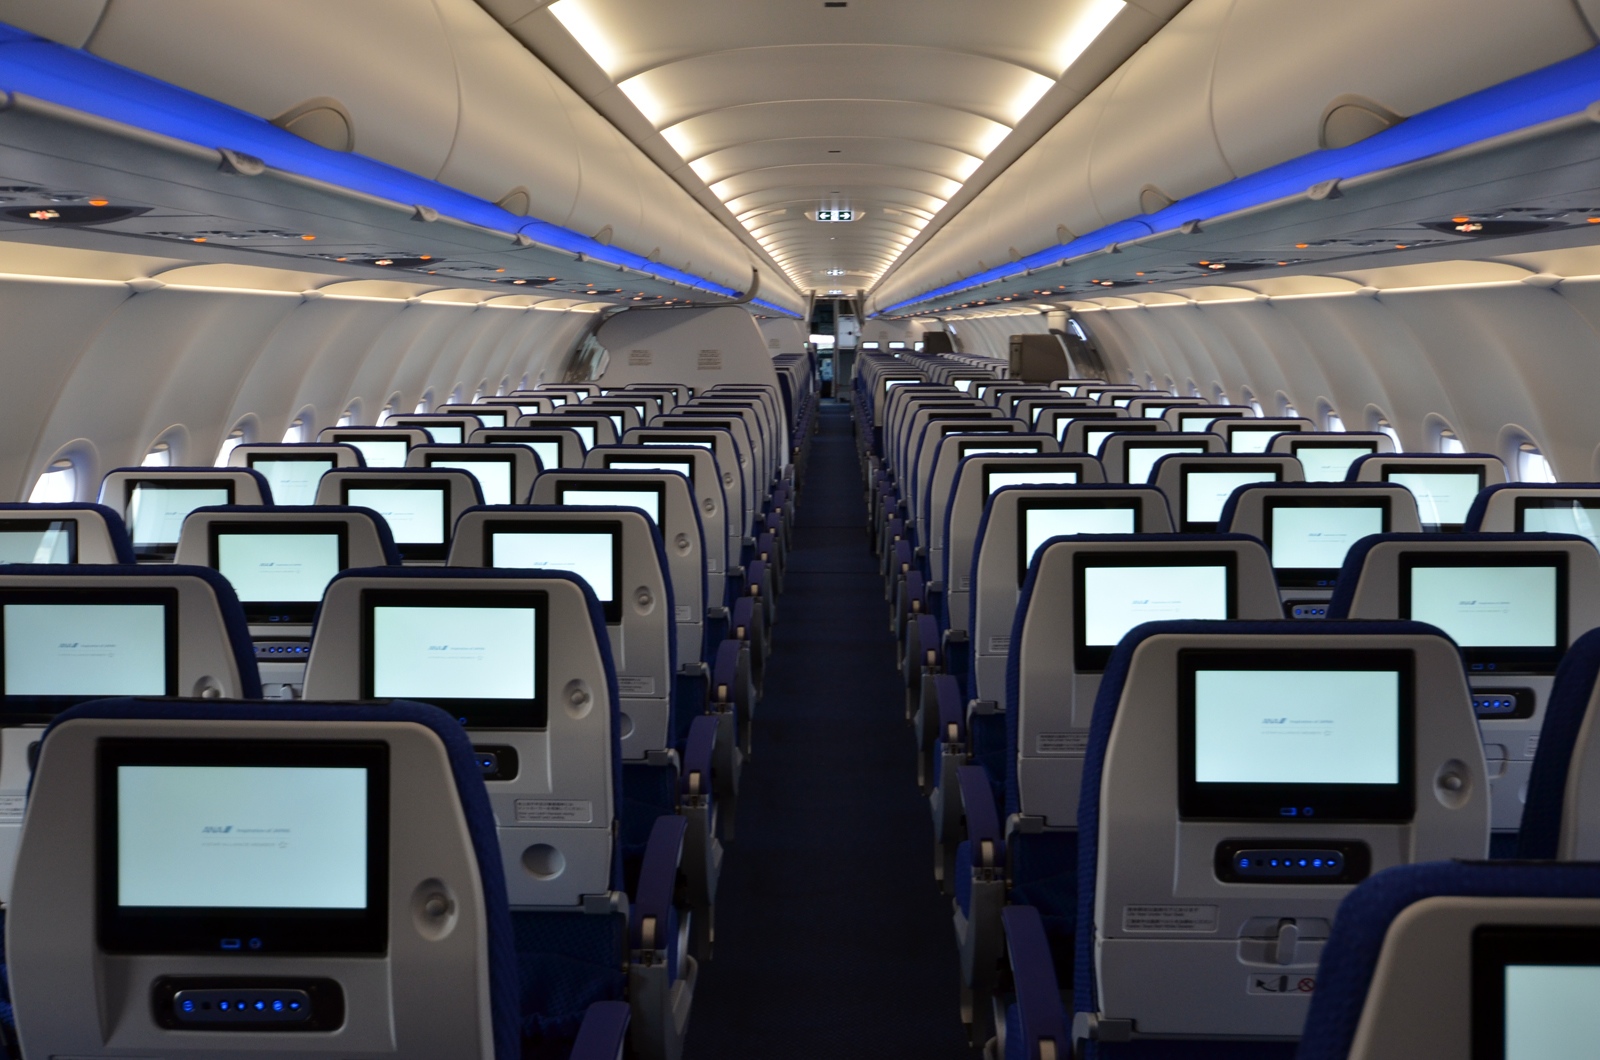 Free wifi on ANA domestic flights – Business Traveller